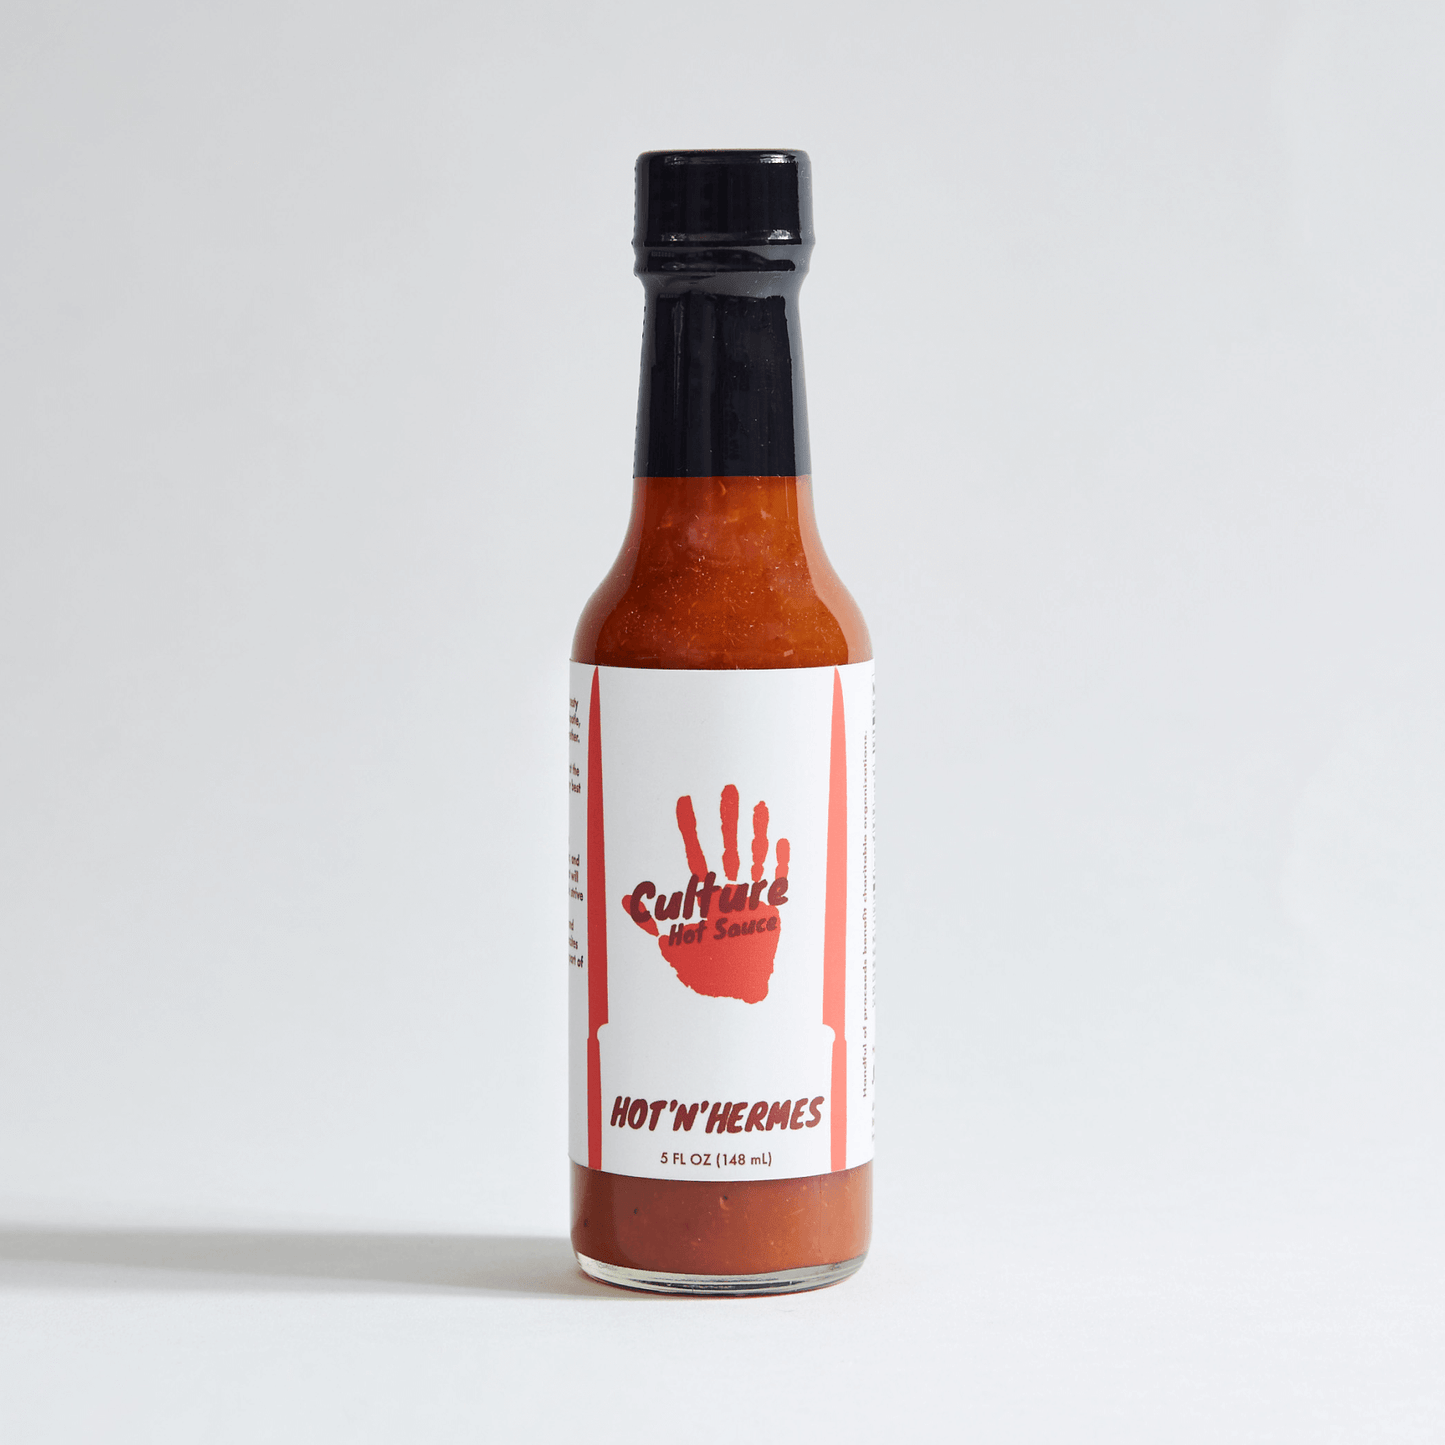 hot n Hermes hot sauce, a custom hot sauce for a wedding, great southern style feel